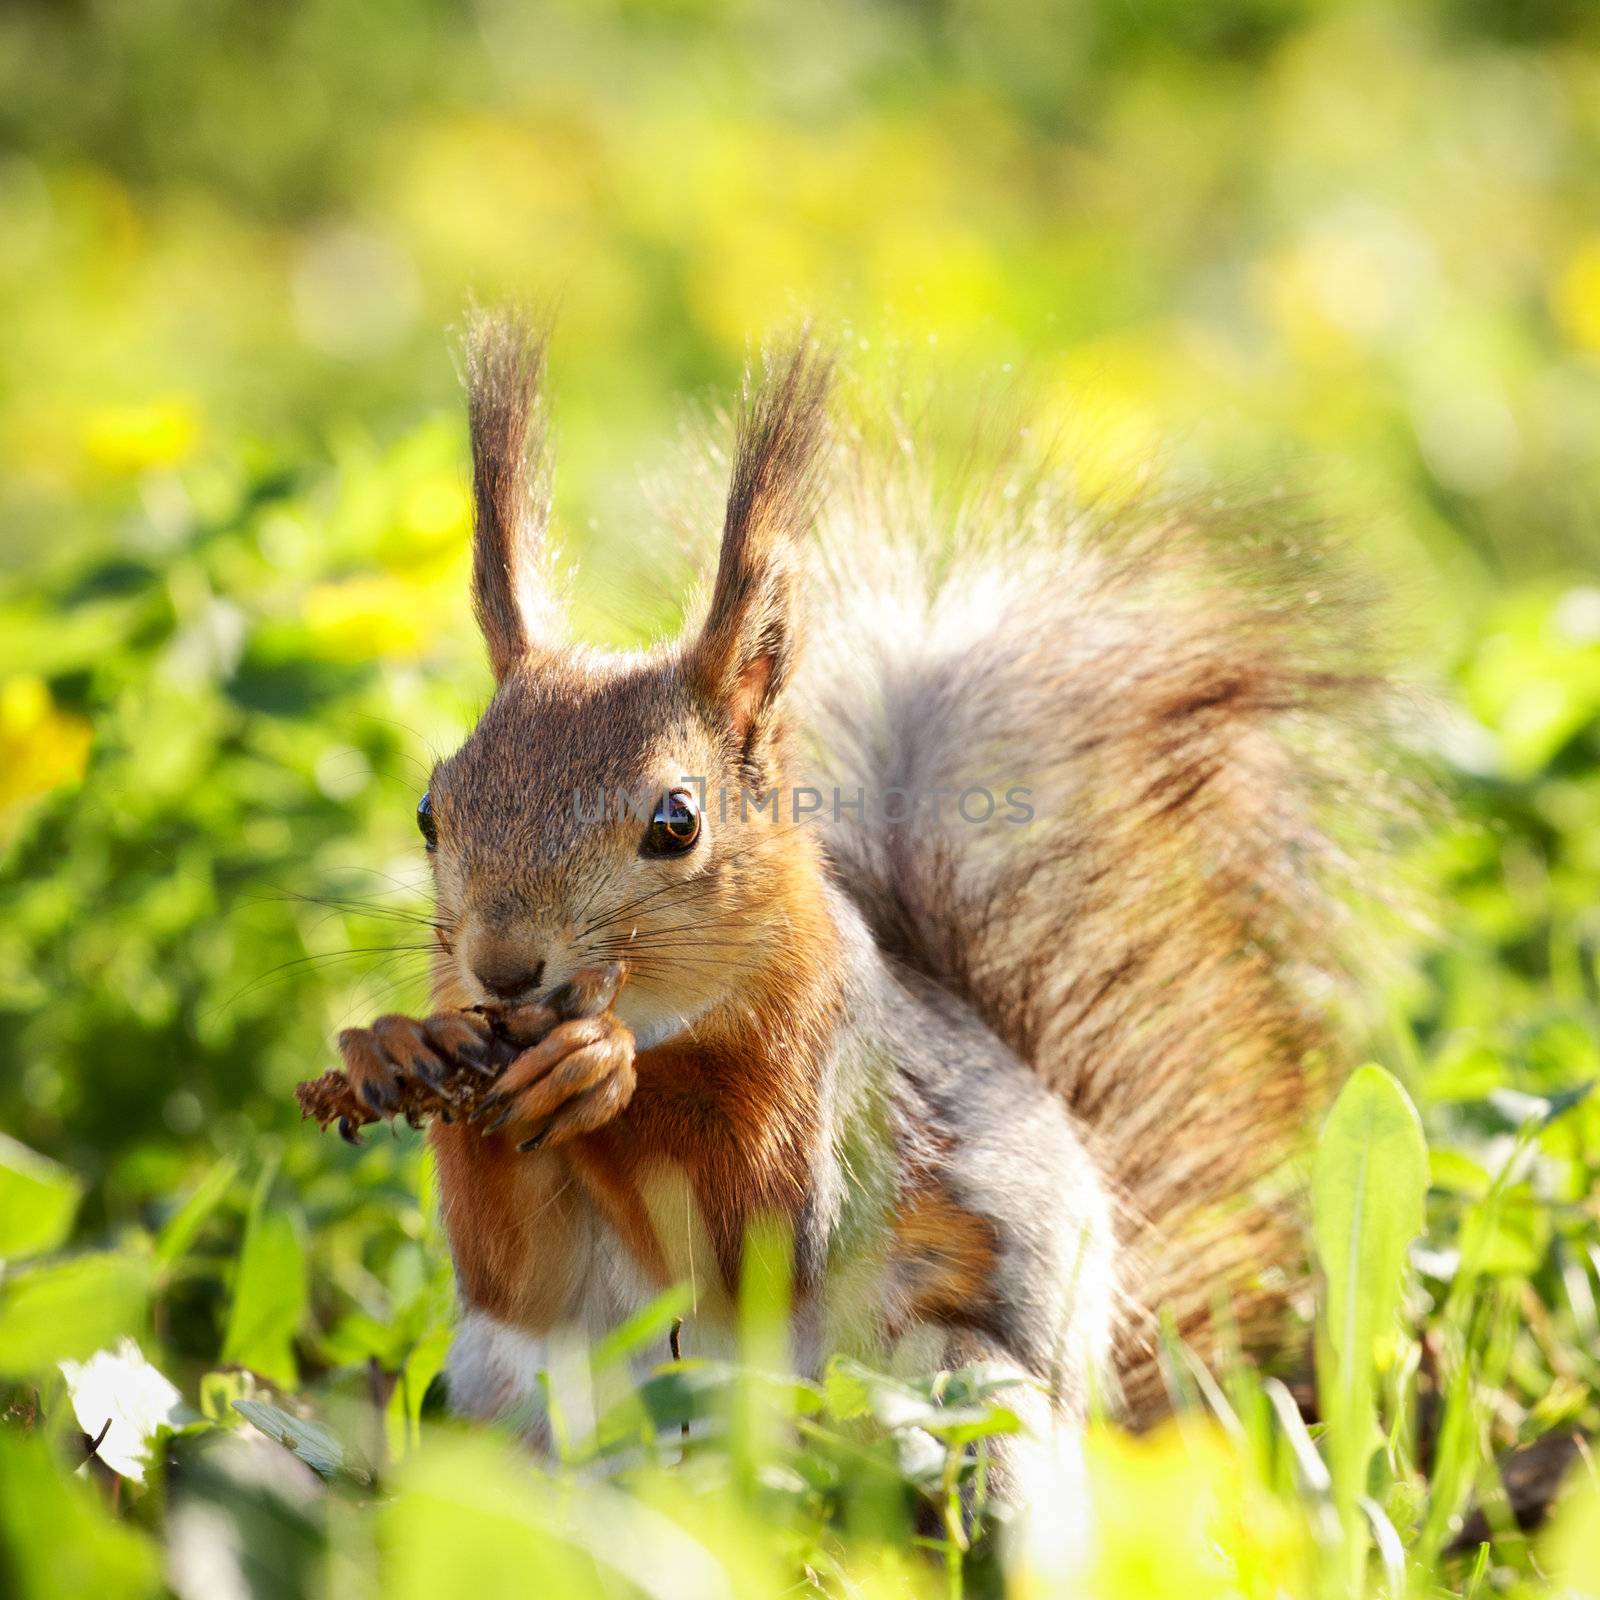 red squirrel in grass eating pinecone at summer day